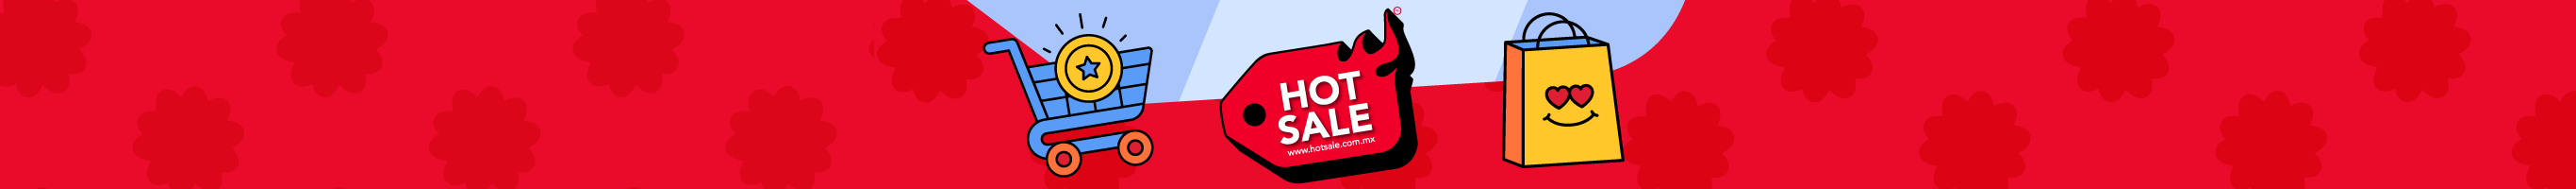 Spin Master - Hot Sale